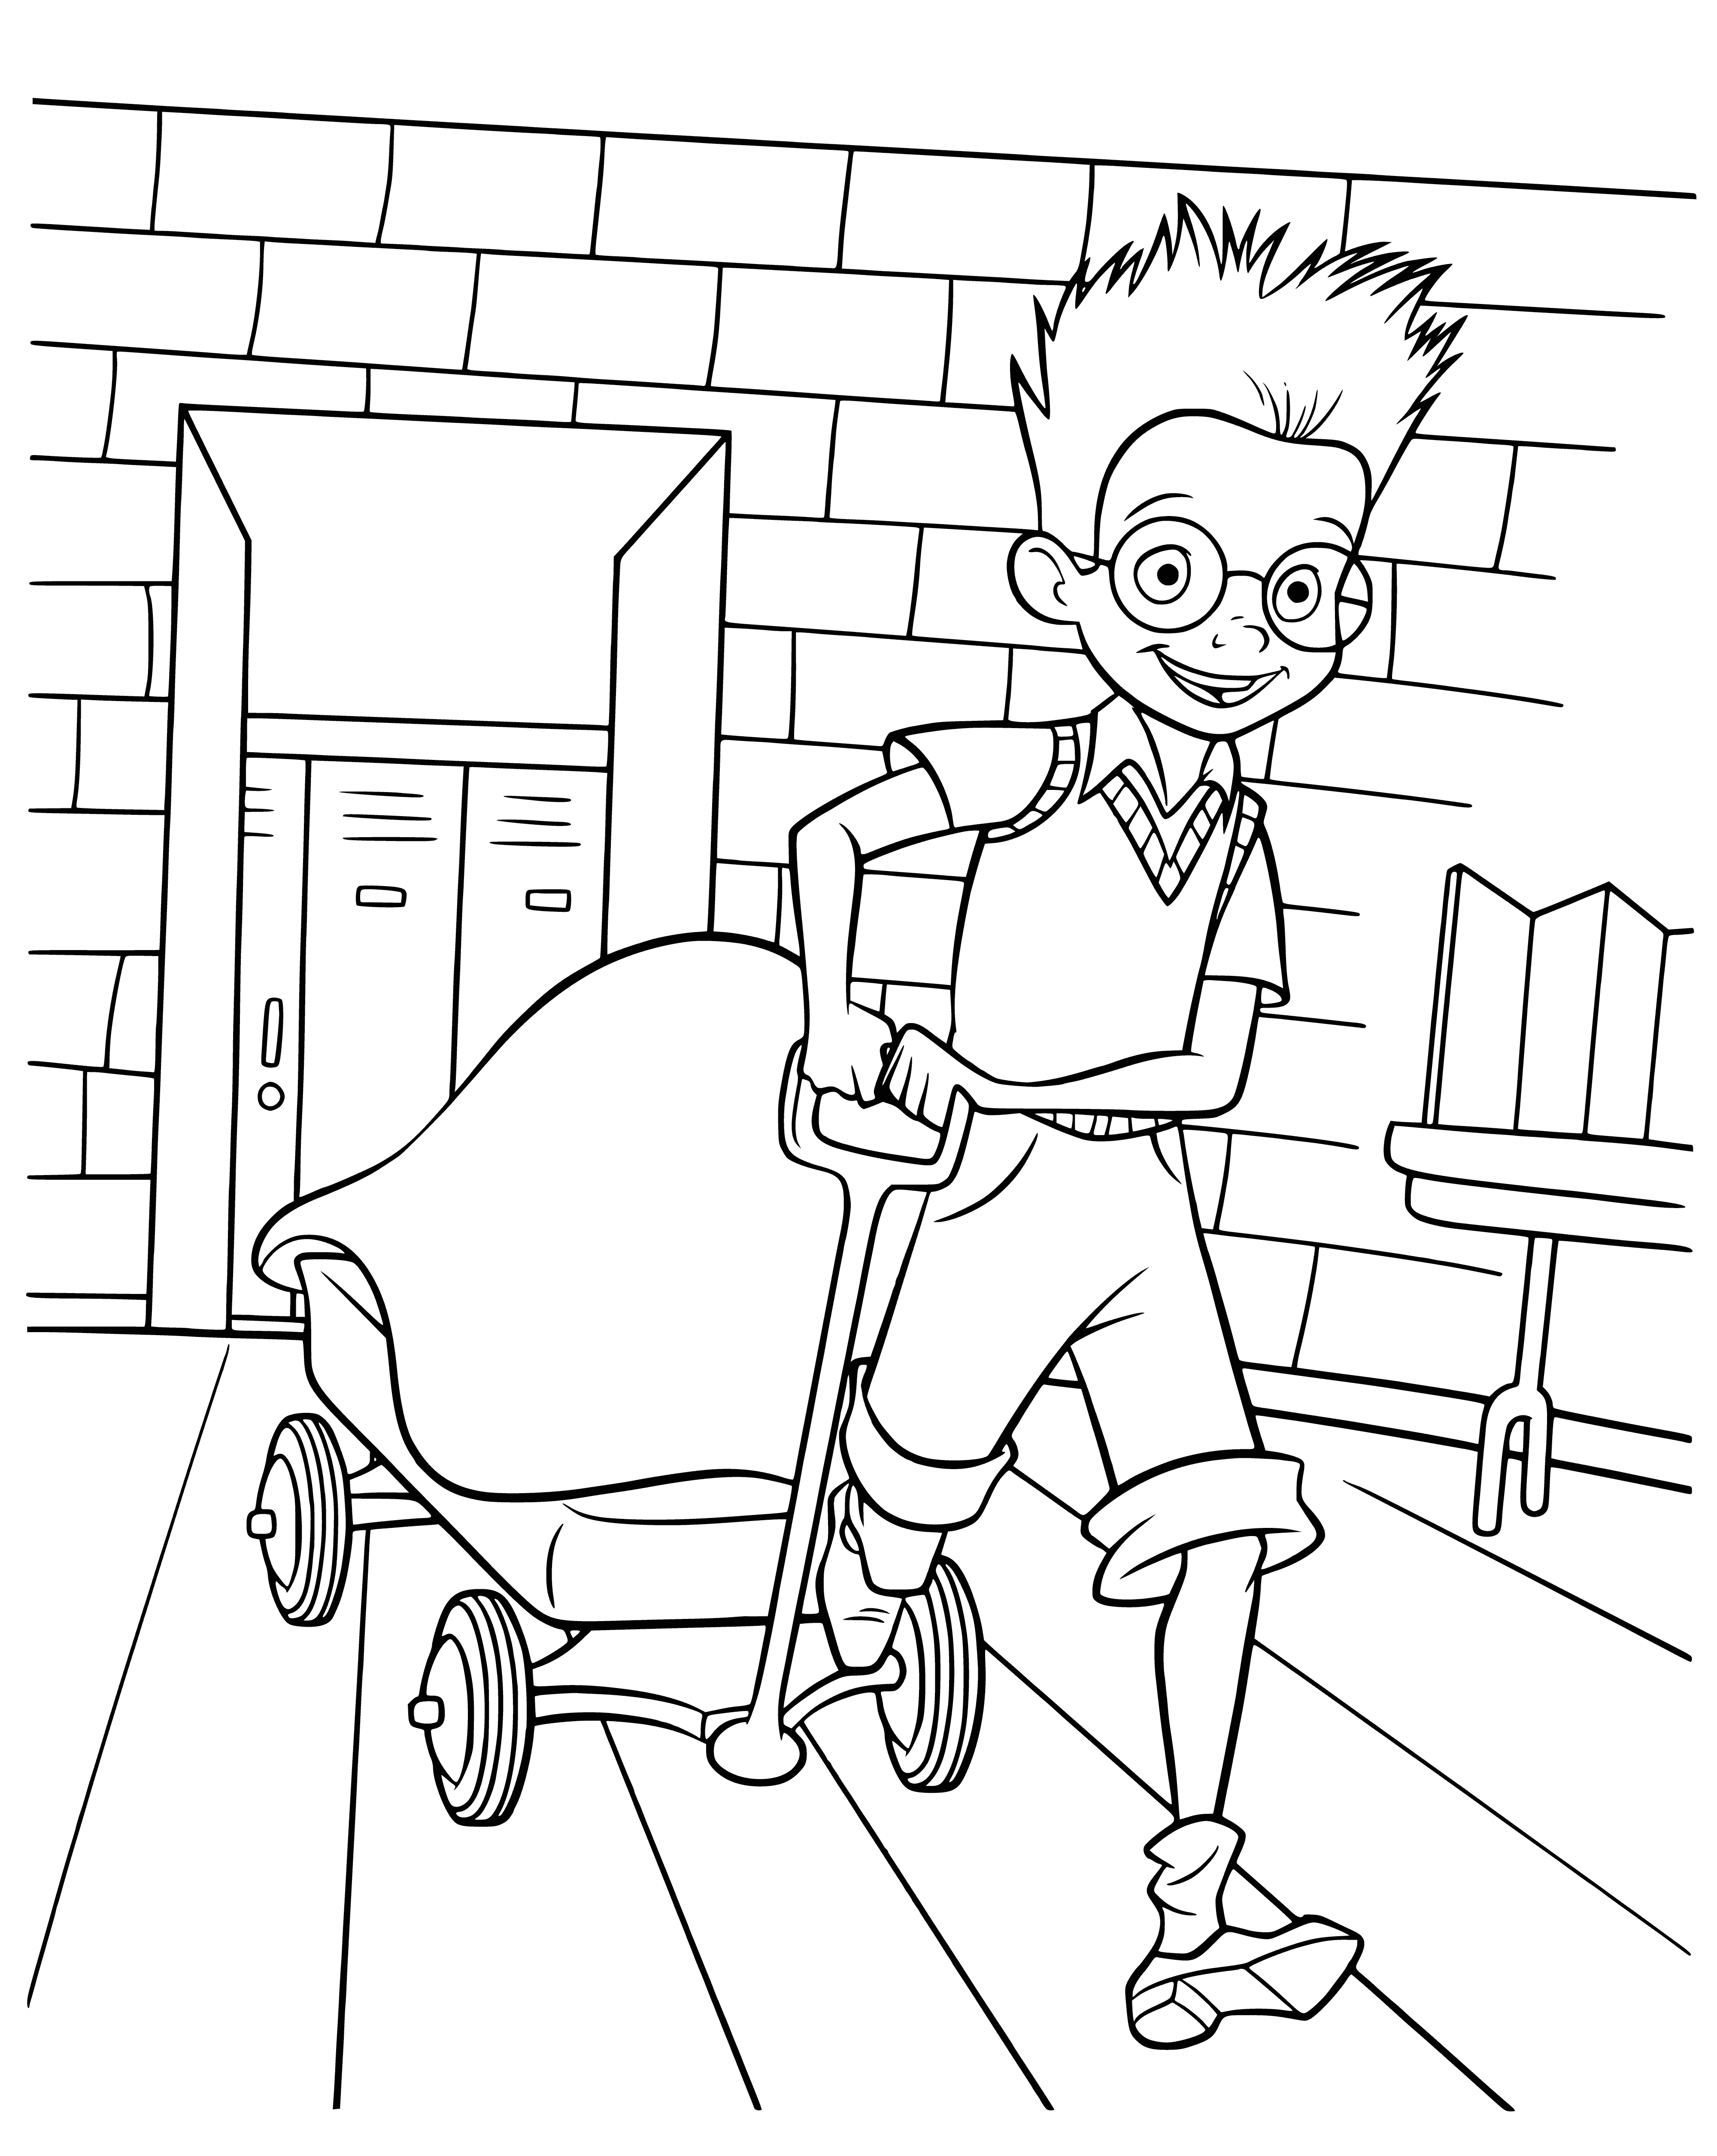 coloring page: Young boy holding up invention: small, round device with handle & lights; 2 buttons; triumphant expression.